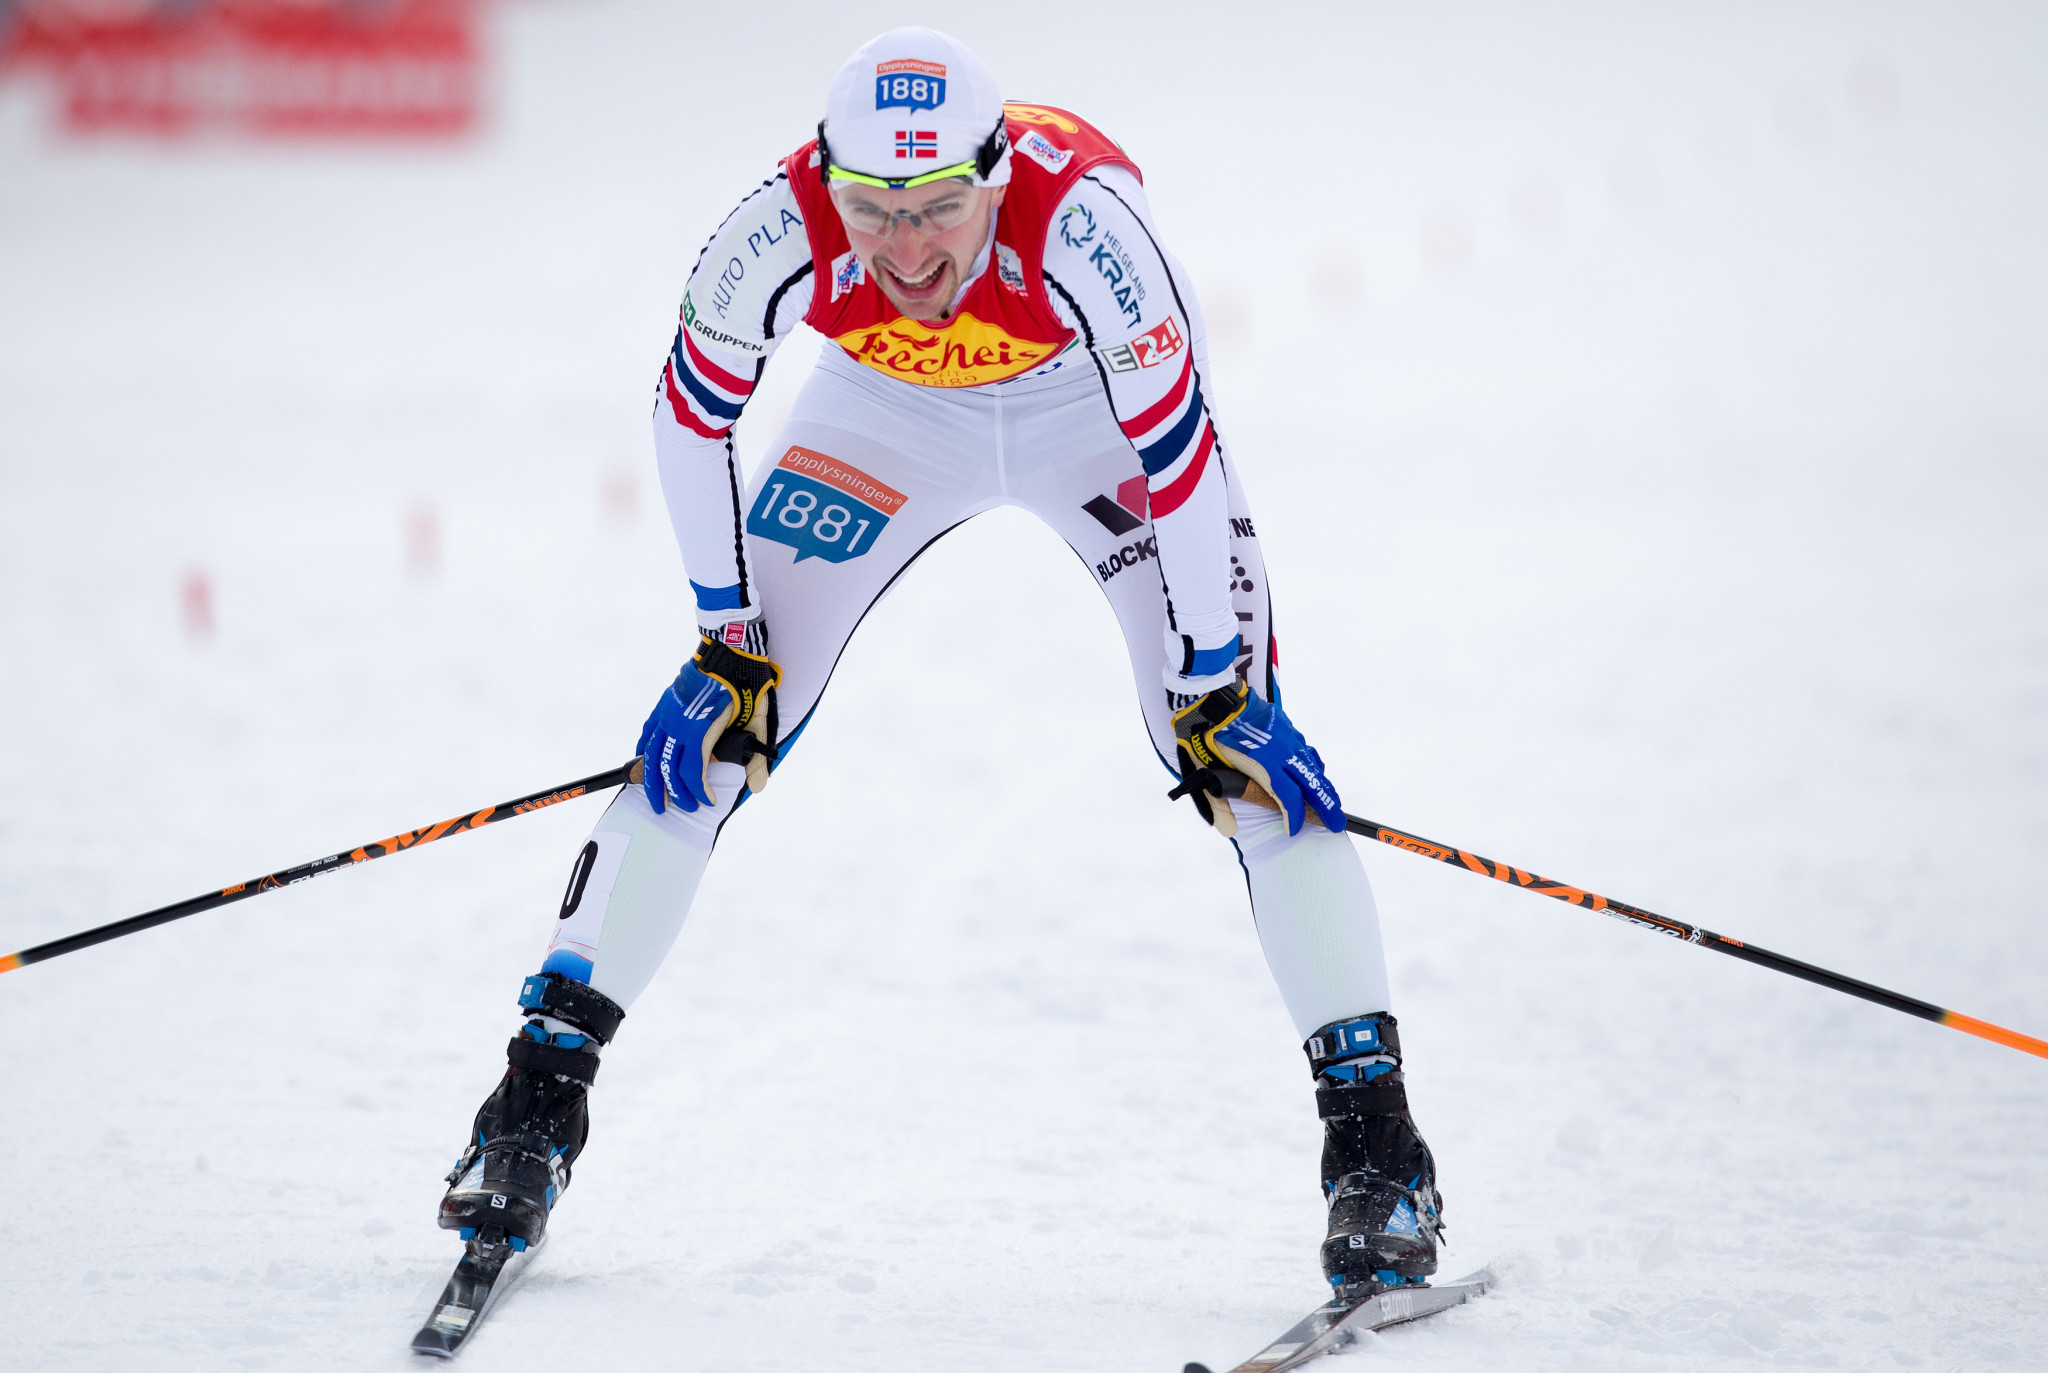 Jan Schmid of Norway extended his lead at the top of the overall standings ©Getty Images